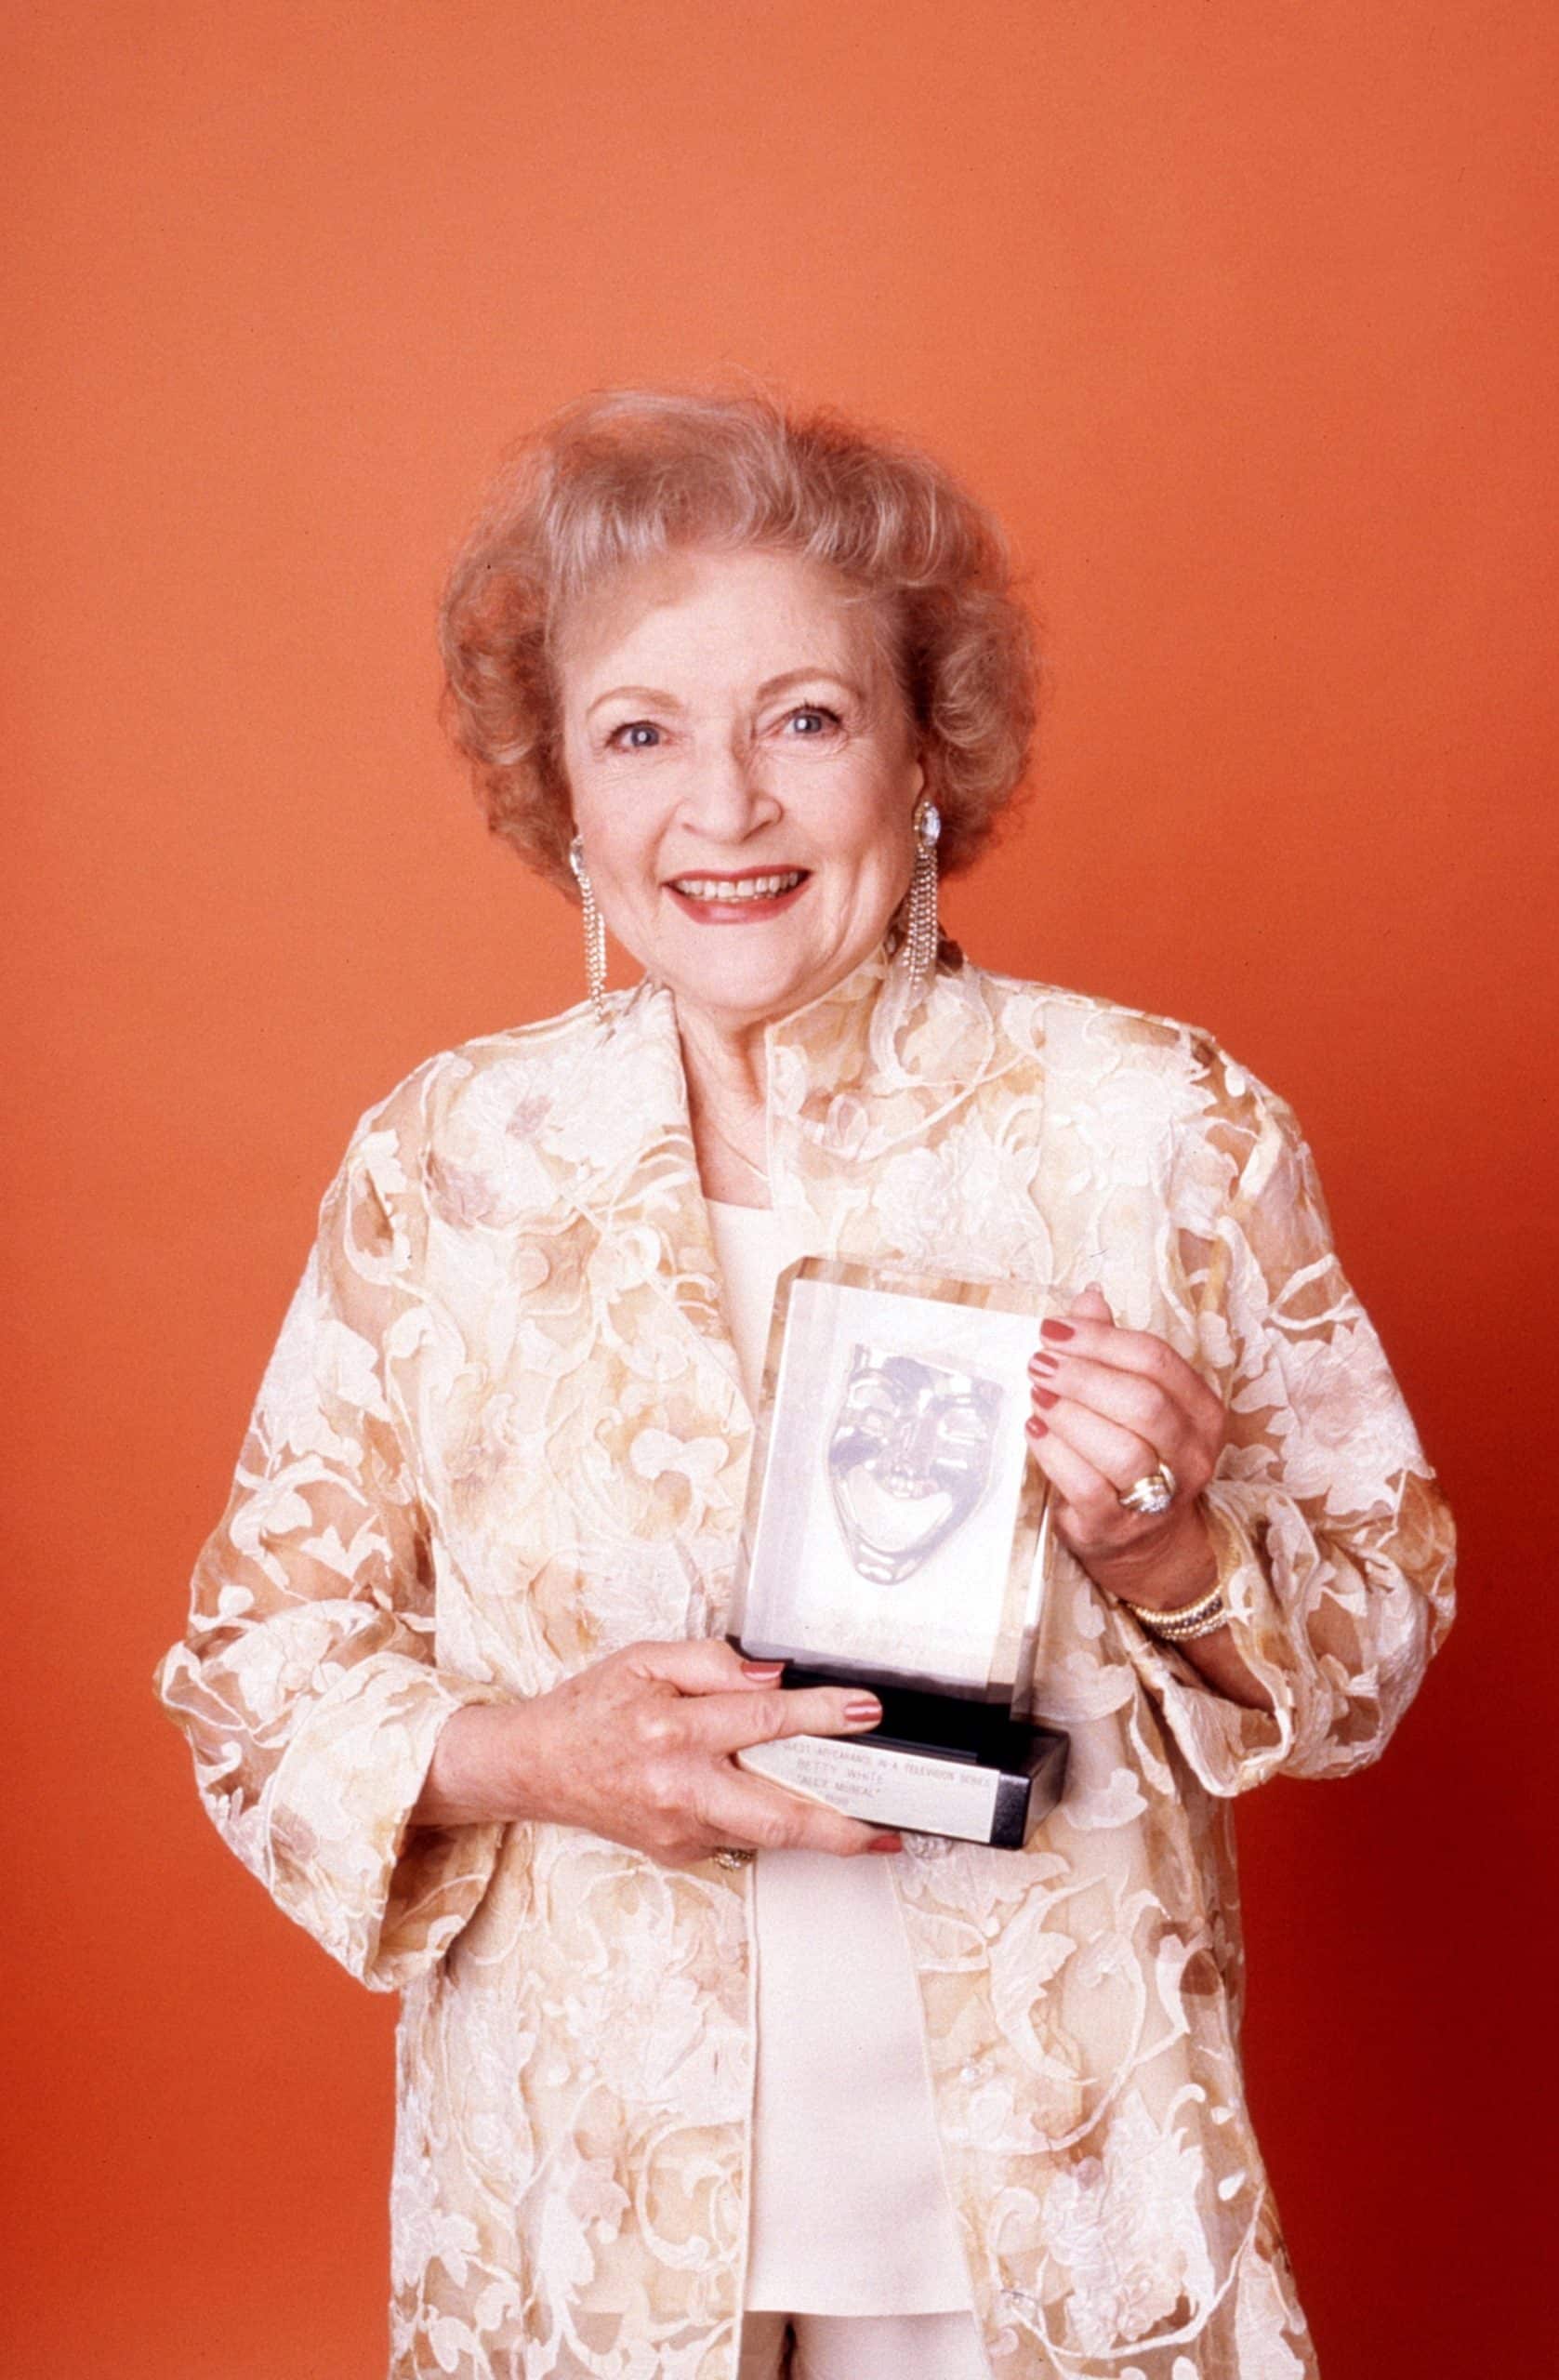 THE 13TH ANNUAL AMERICAN COMEDY AWARDS, Betty White, 1999